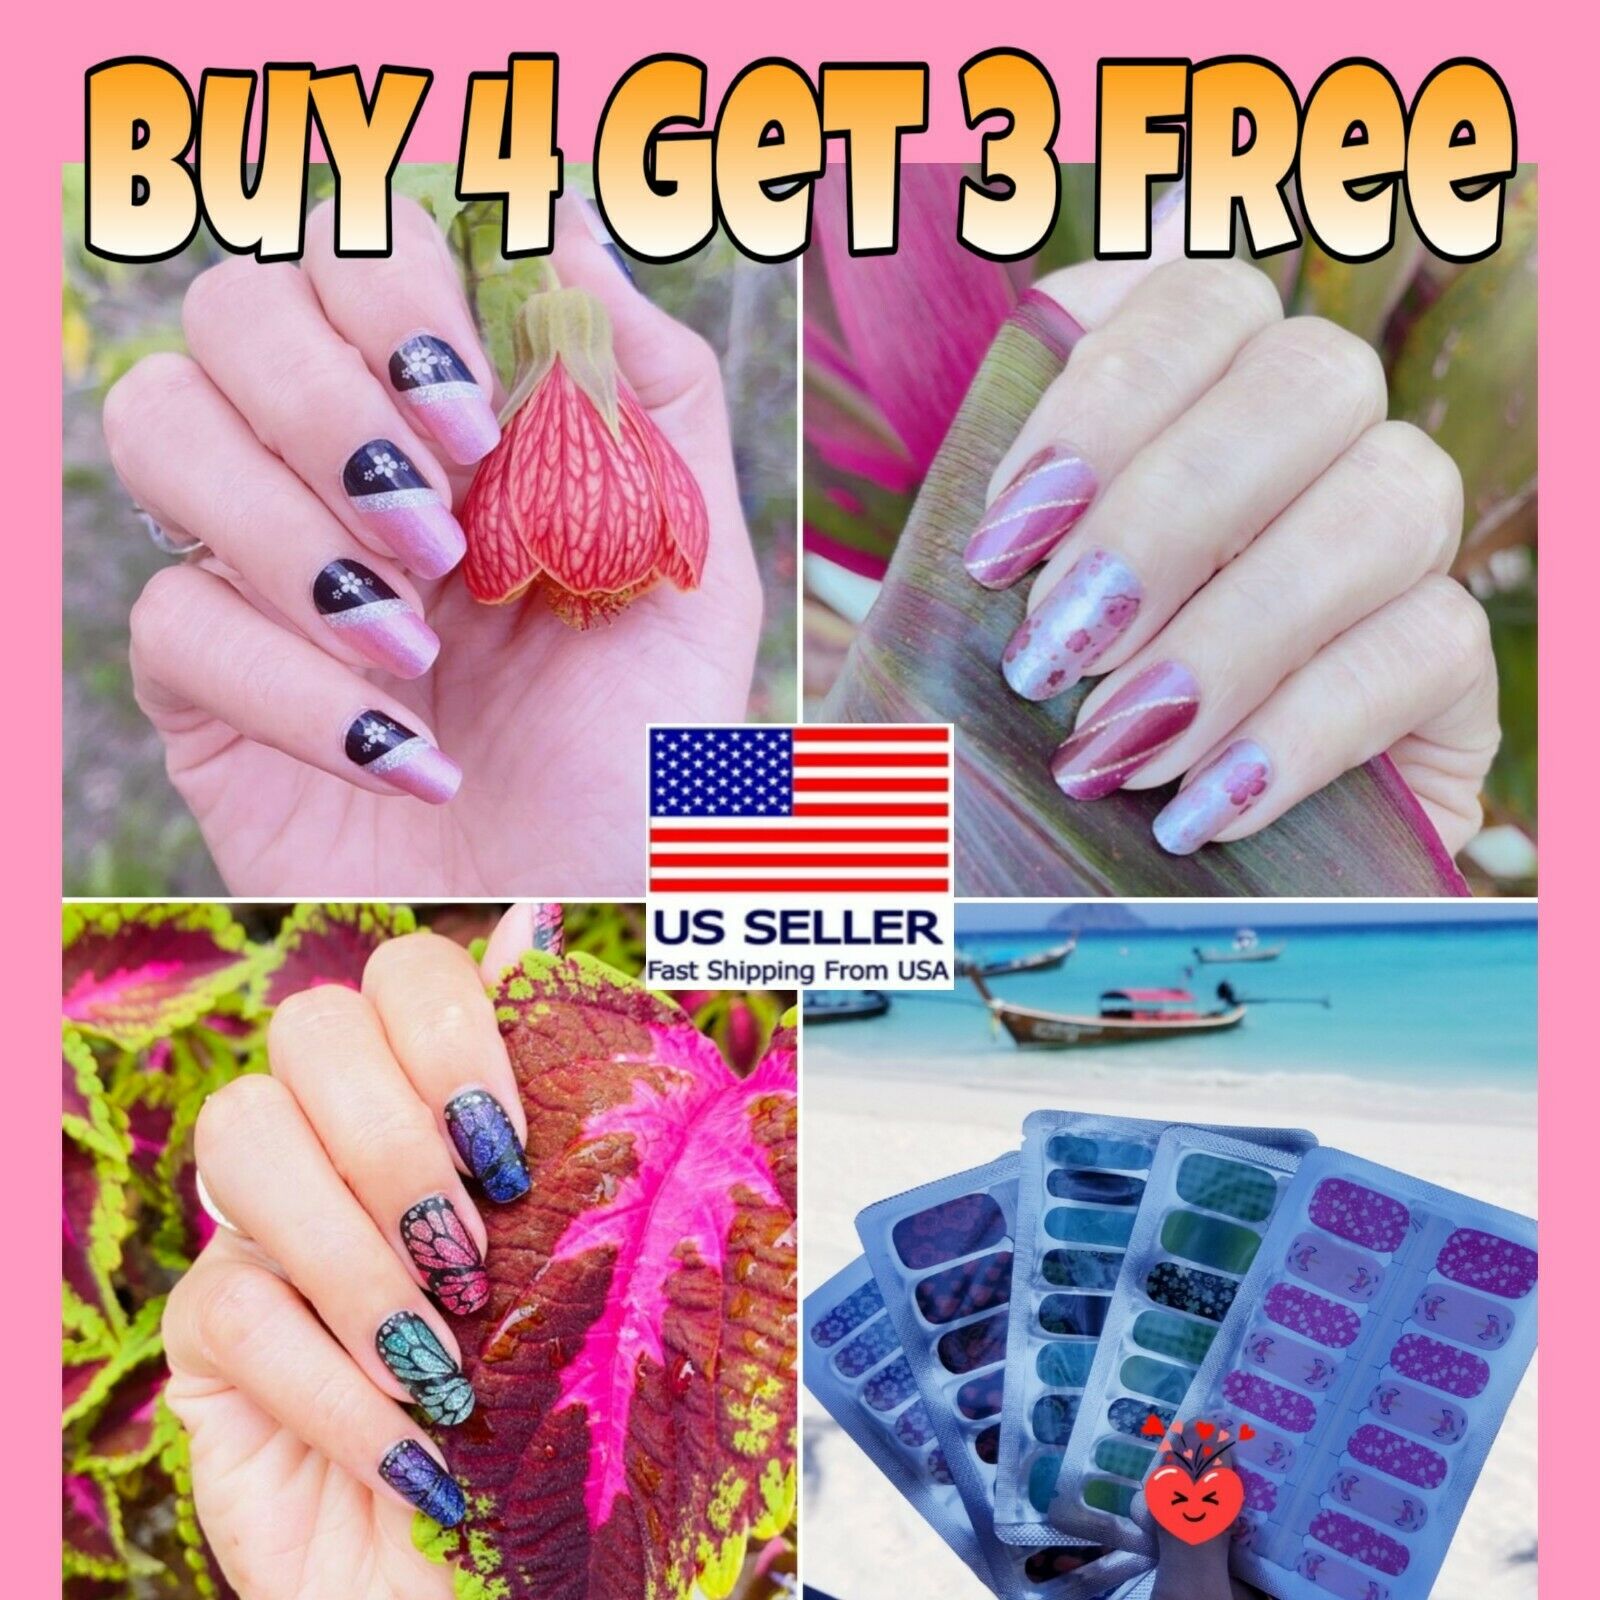 Color Nail Polish Strips Buy 4 Get 3 Free Glitter Flowers Nail Wraps Stickers